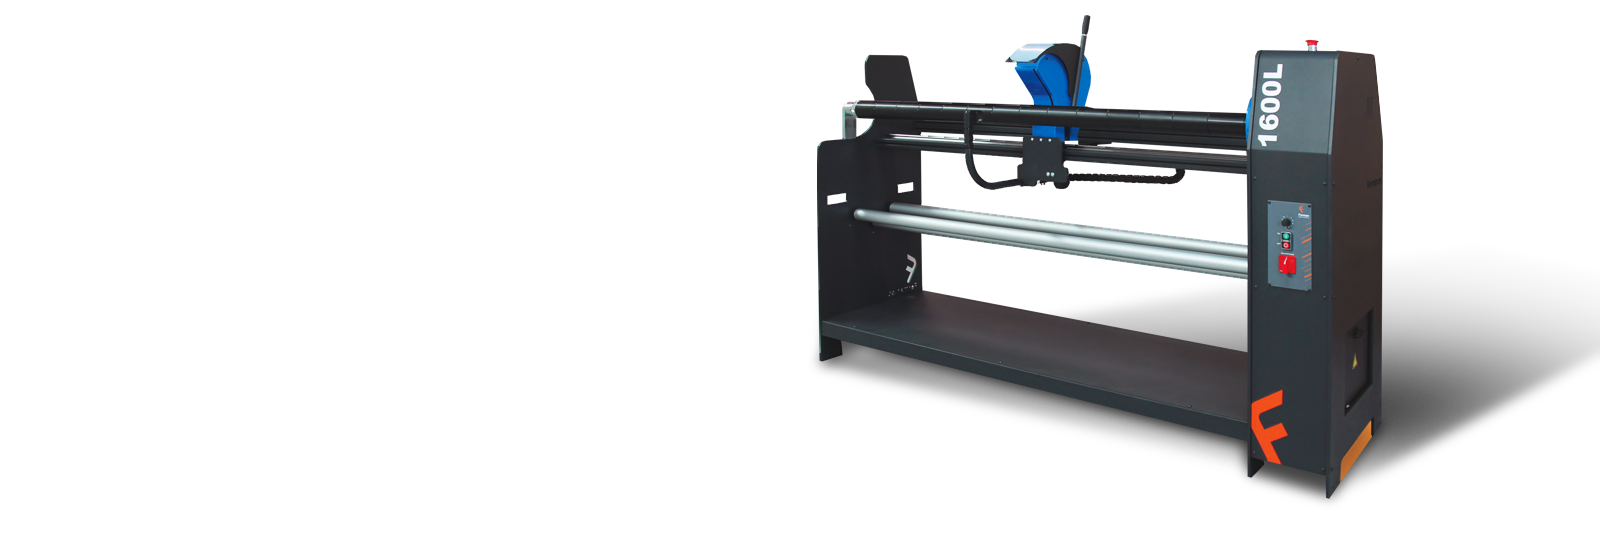 Laminating and cutting machines Ferman; laminator for traffic signs, for signwriters, for glaziers, manual  laminators and cold laminators.  Cutting machine to cut rolls of vinyl, reflective sheet, canvas, application tape, textile.